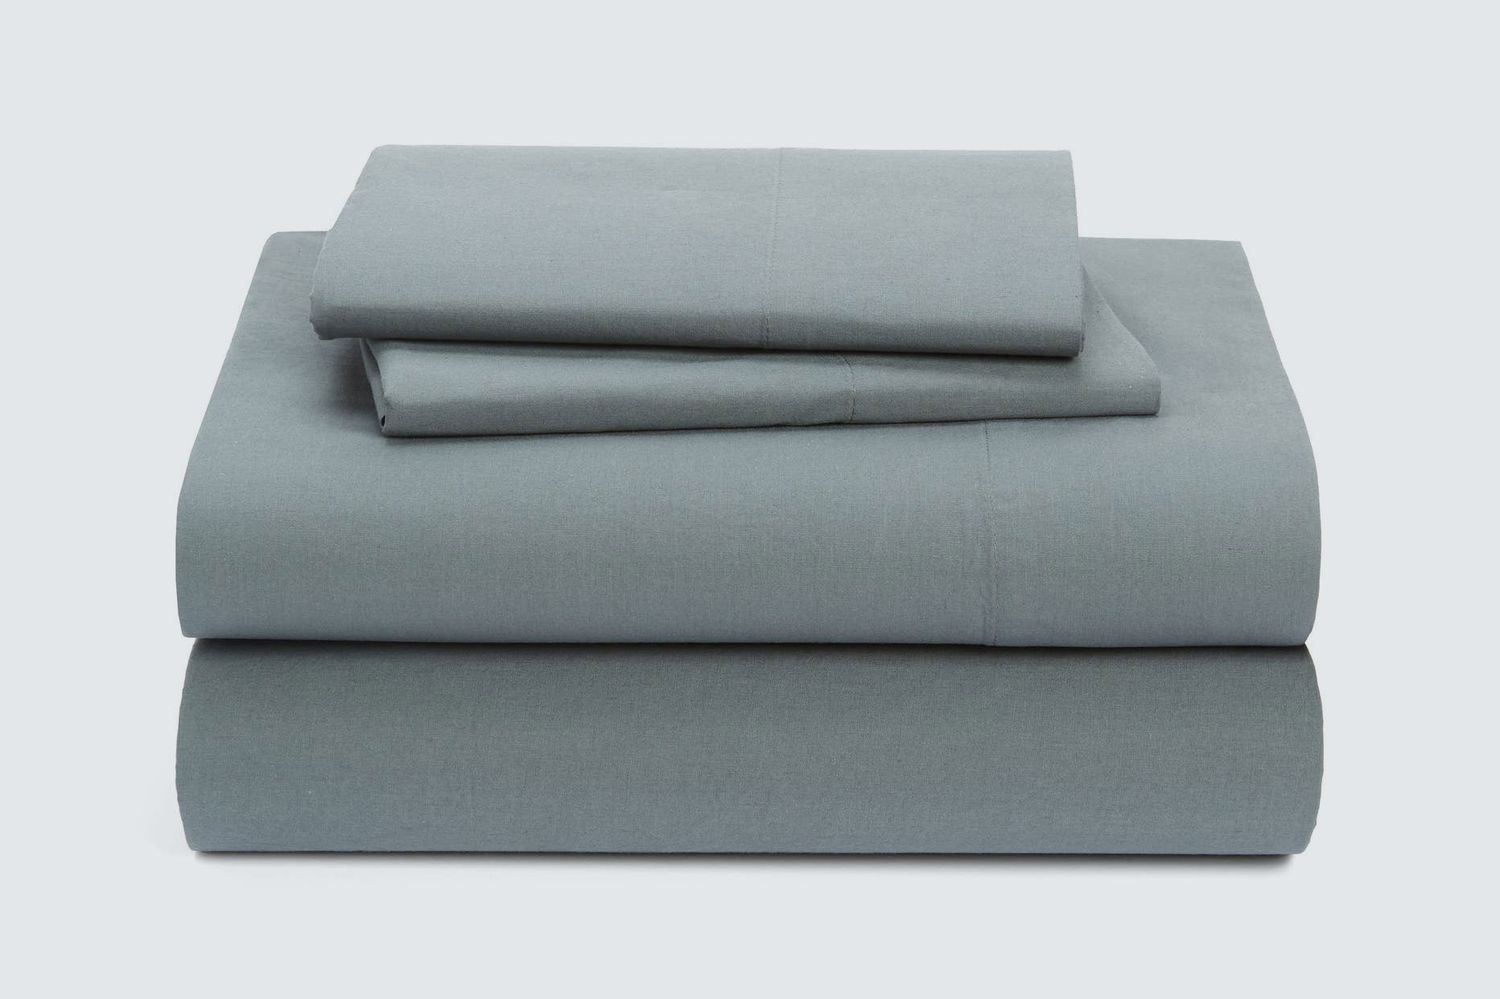 NORDSTROM at Home Percale Sheet Set